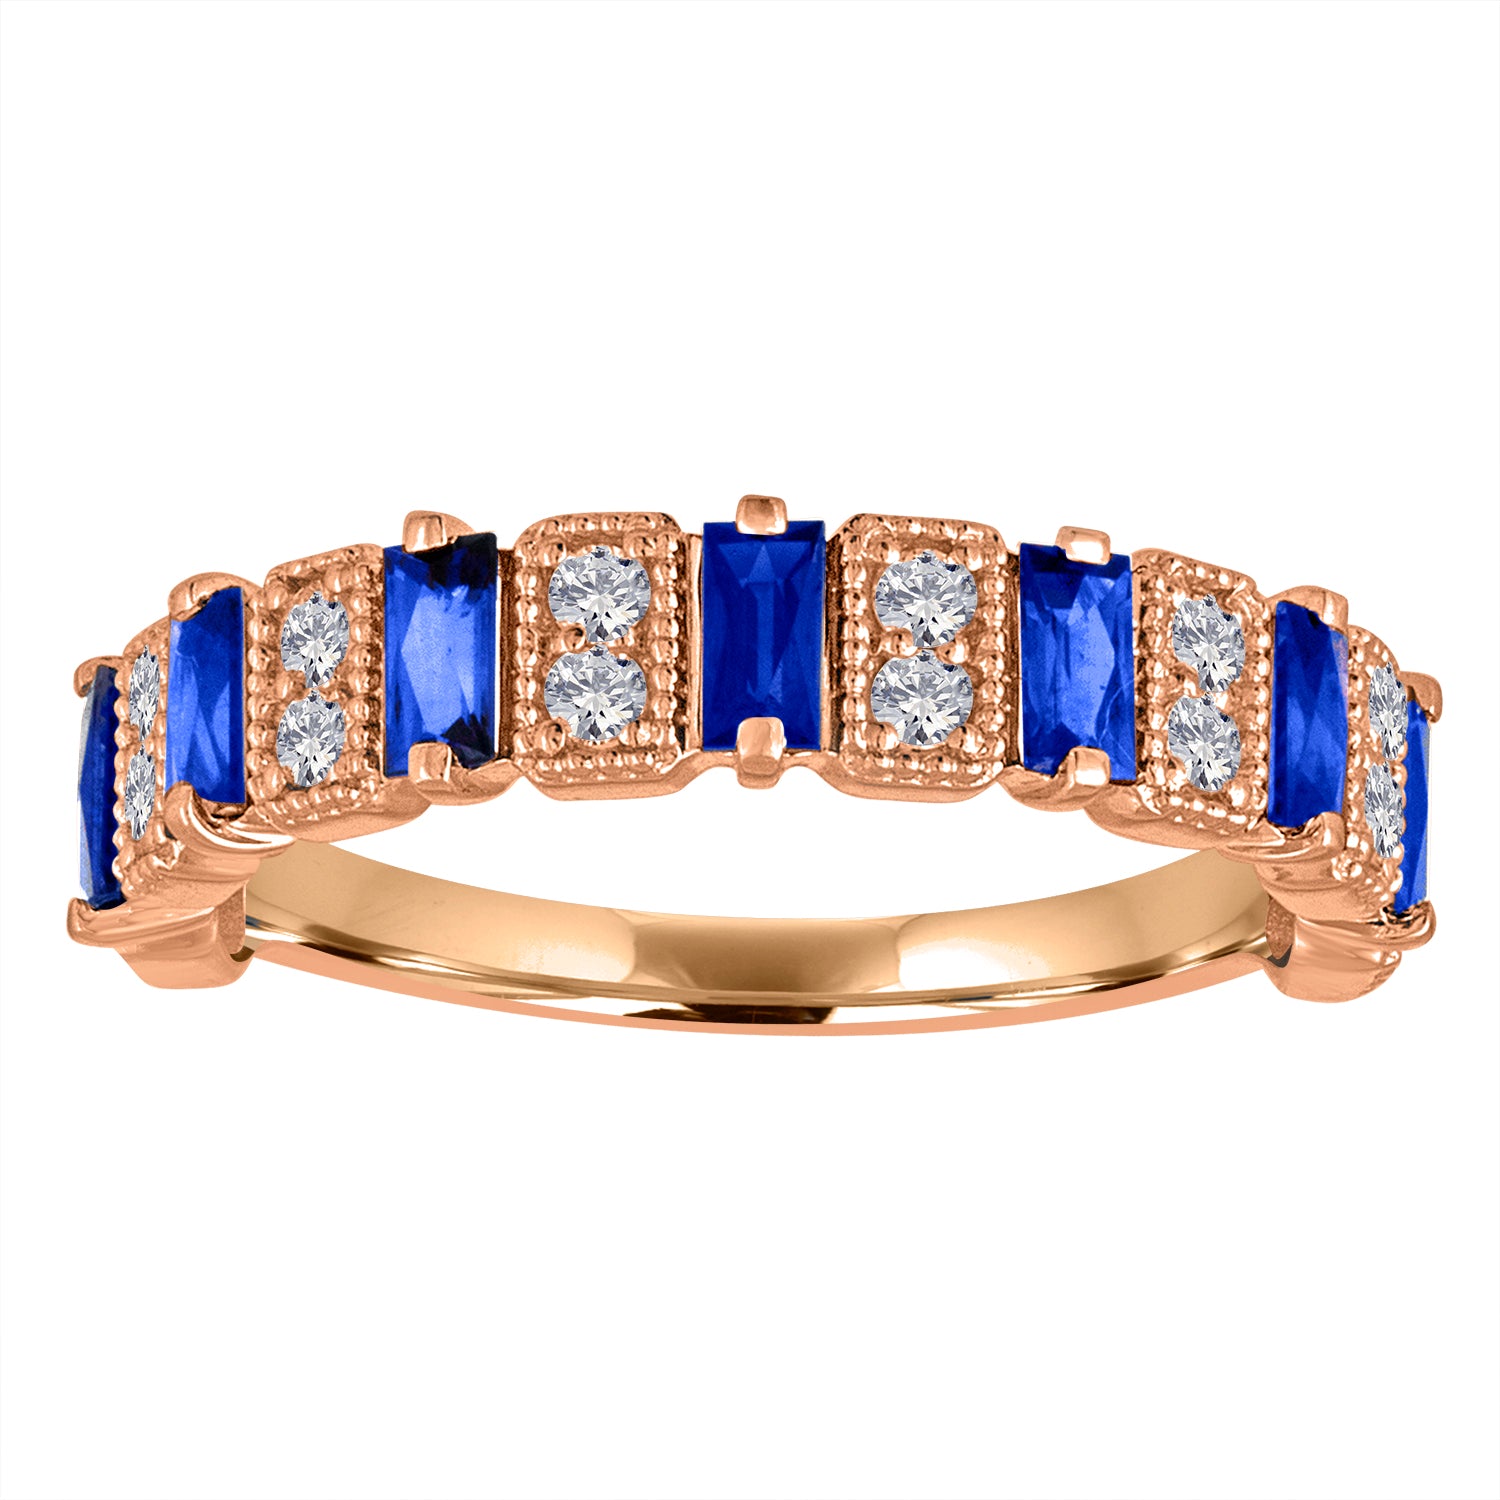 Rose gold wide band with blue sapphire baguettes and round diamonds.